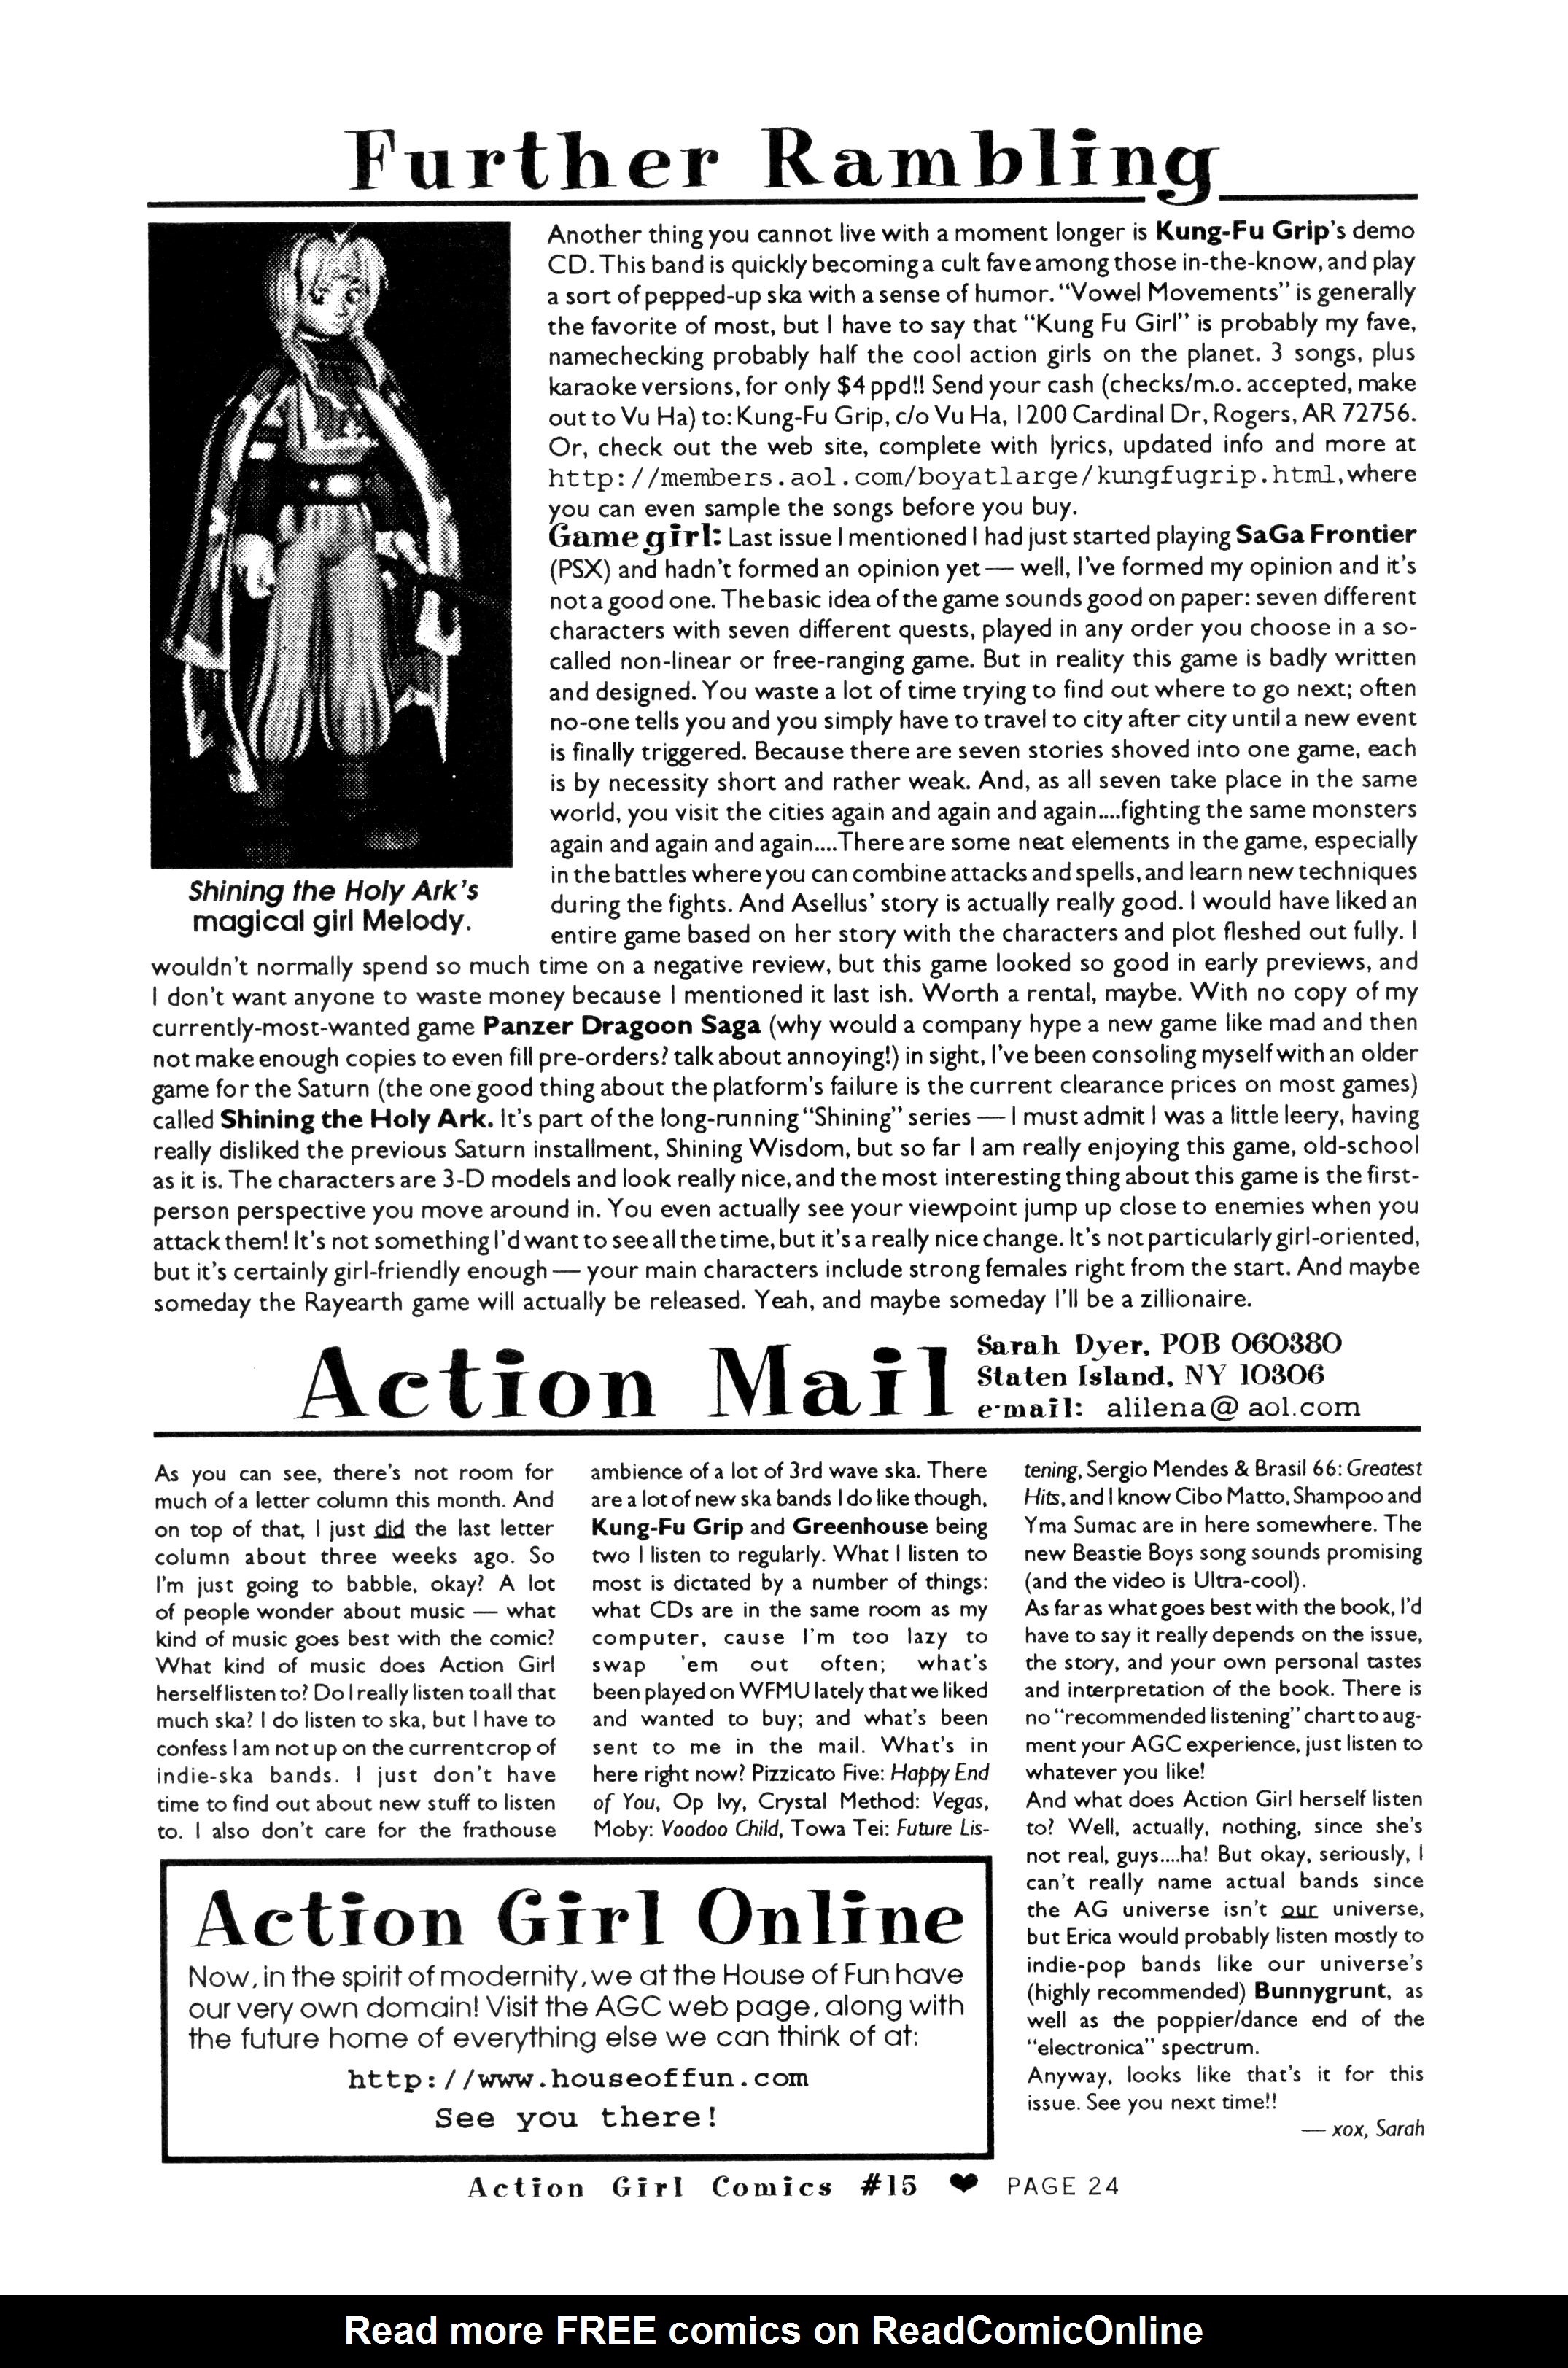 Read online Action Girl Comics comic -  Issue #15 - 26